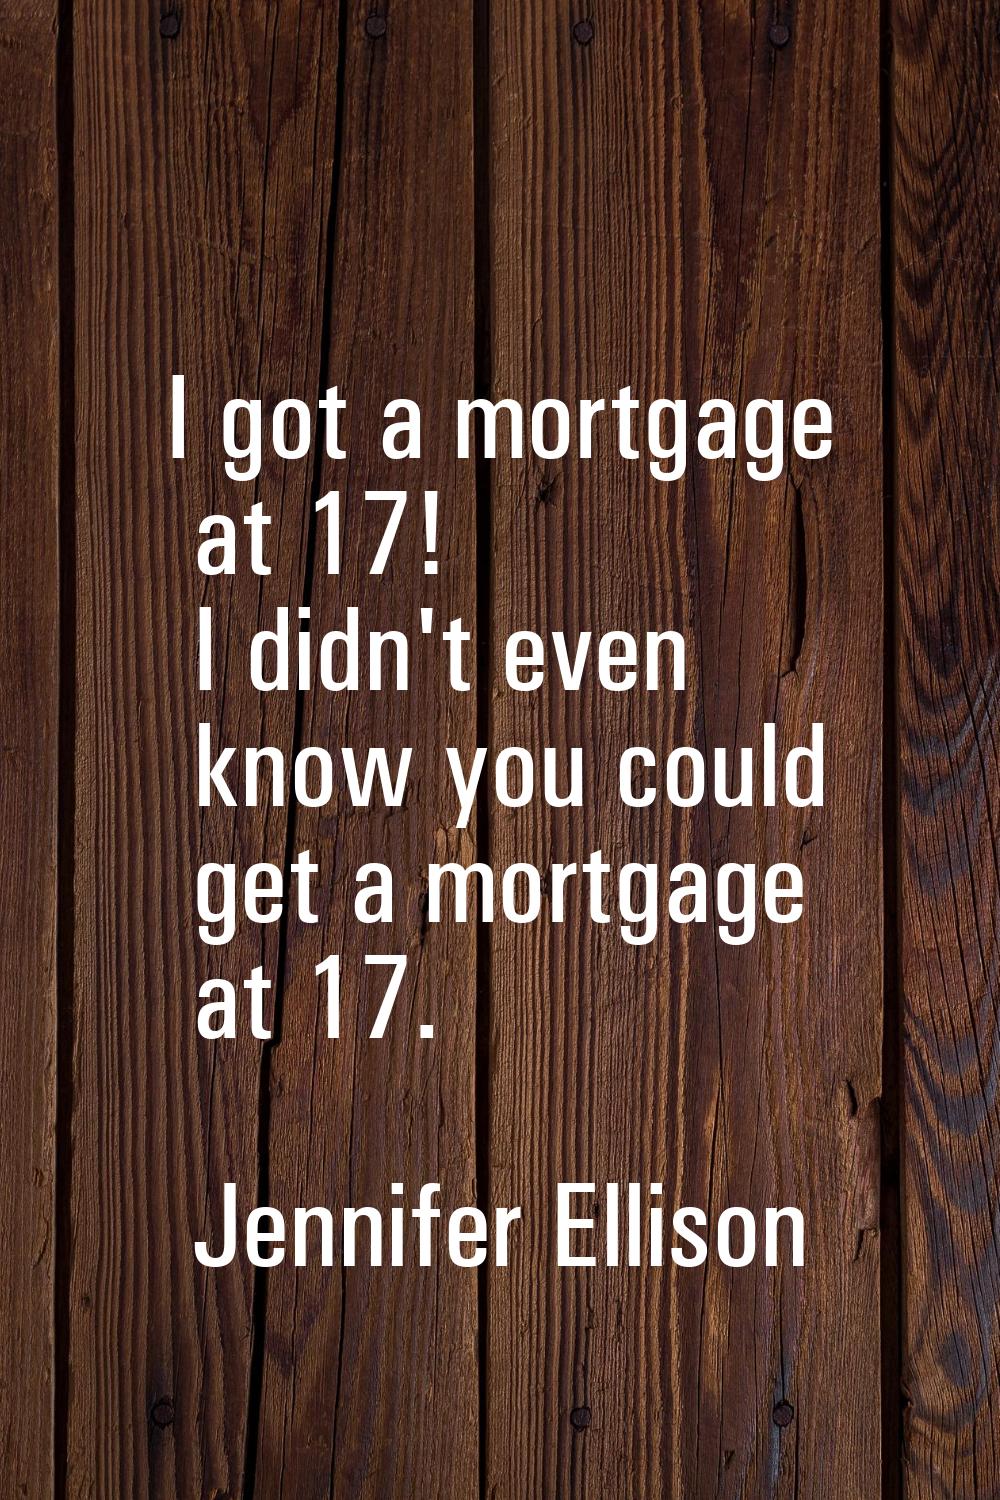 I got a mortgage at 17! I didn't even know you could get a mortgage at 17.